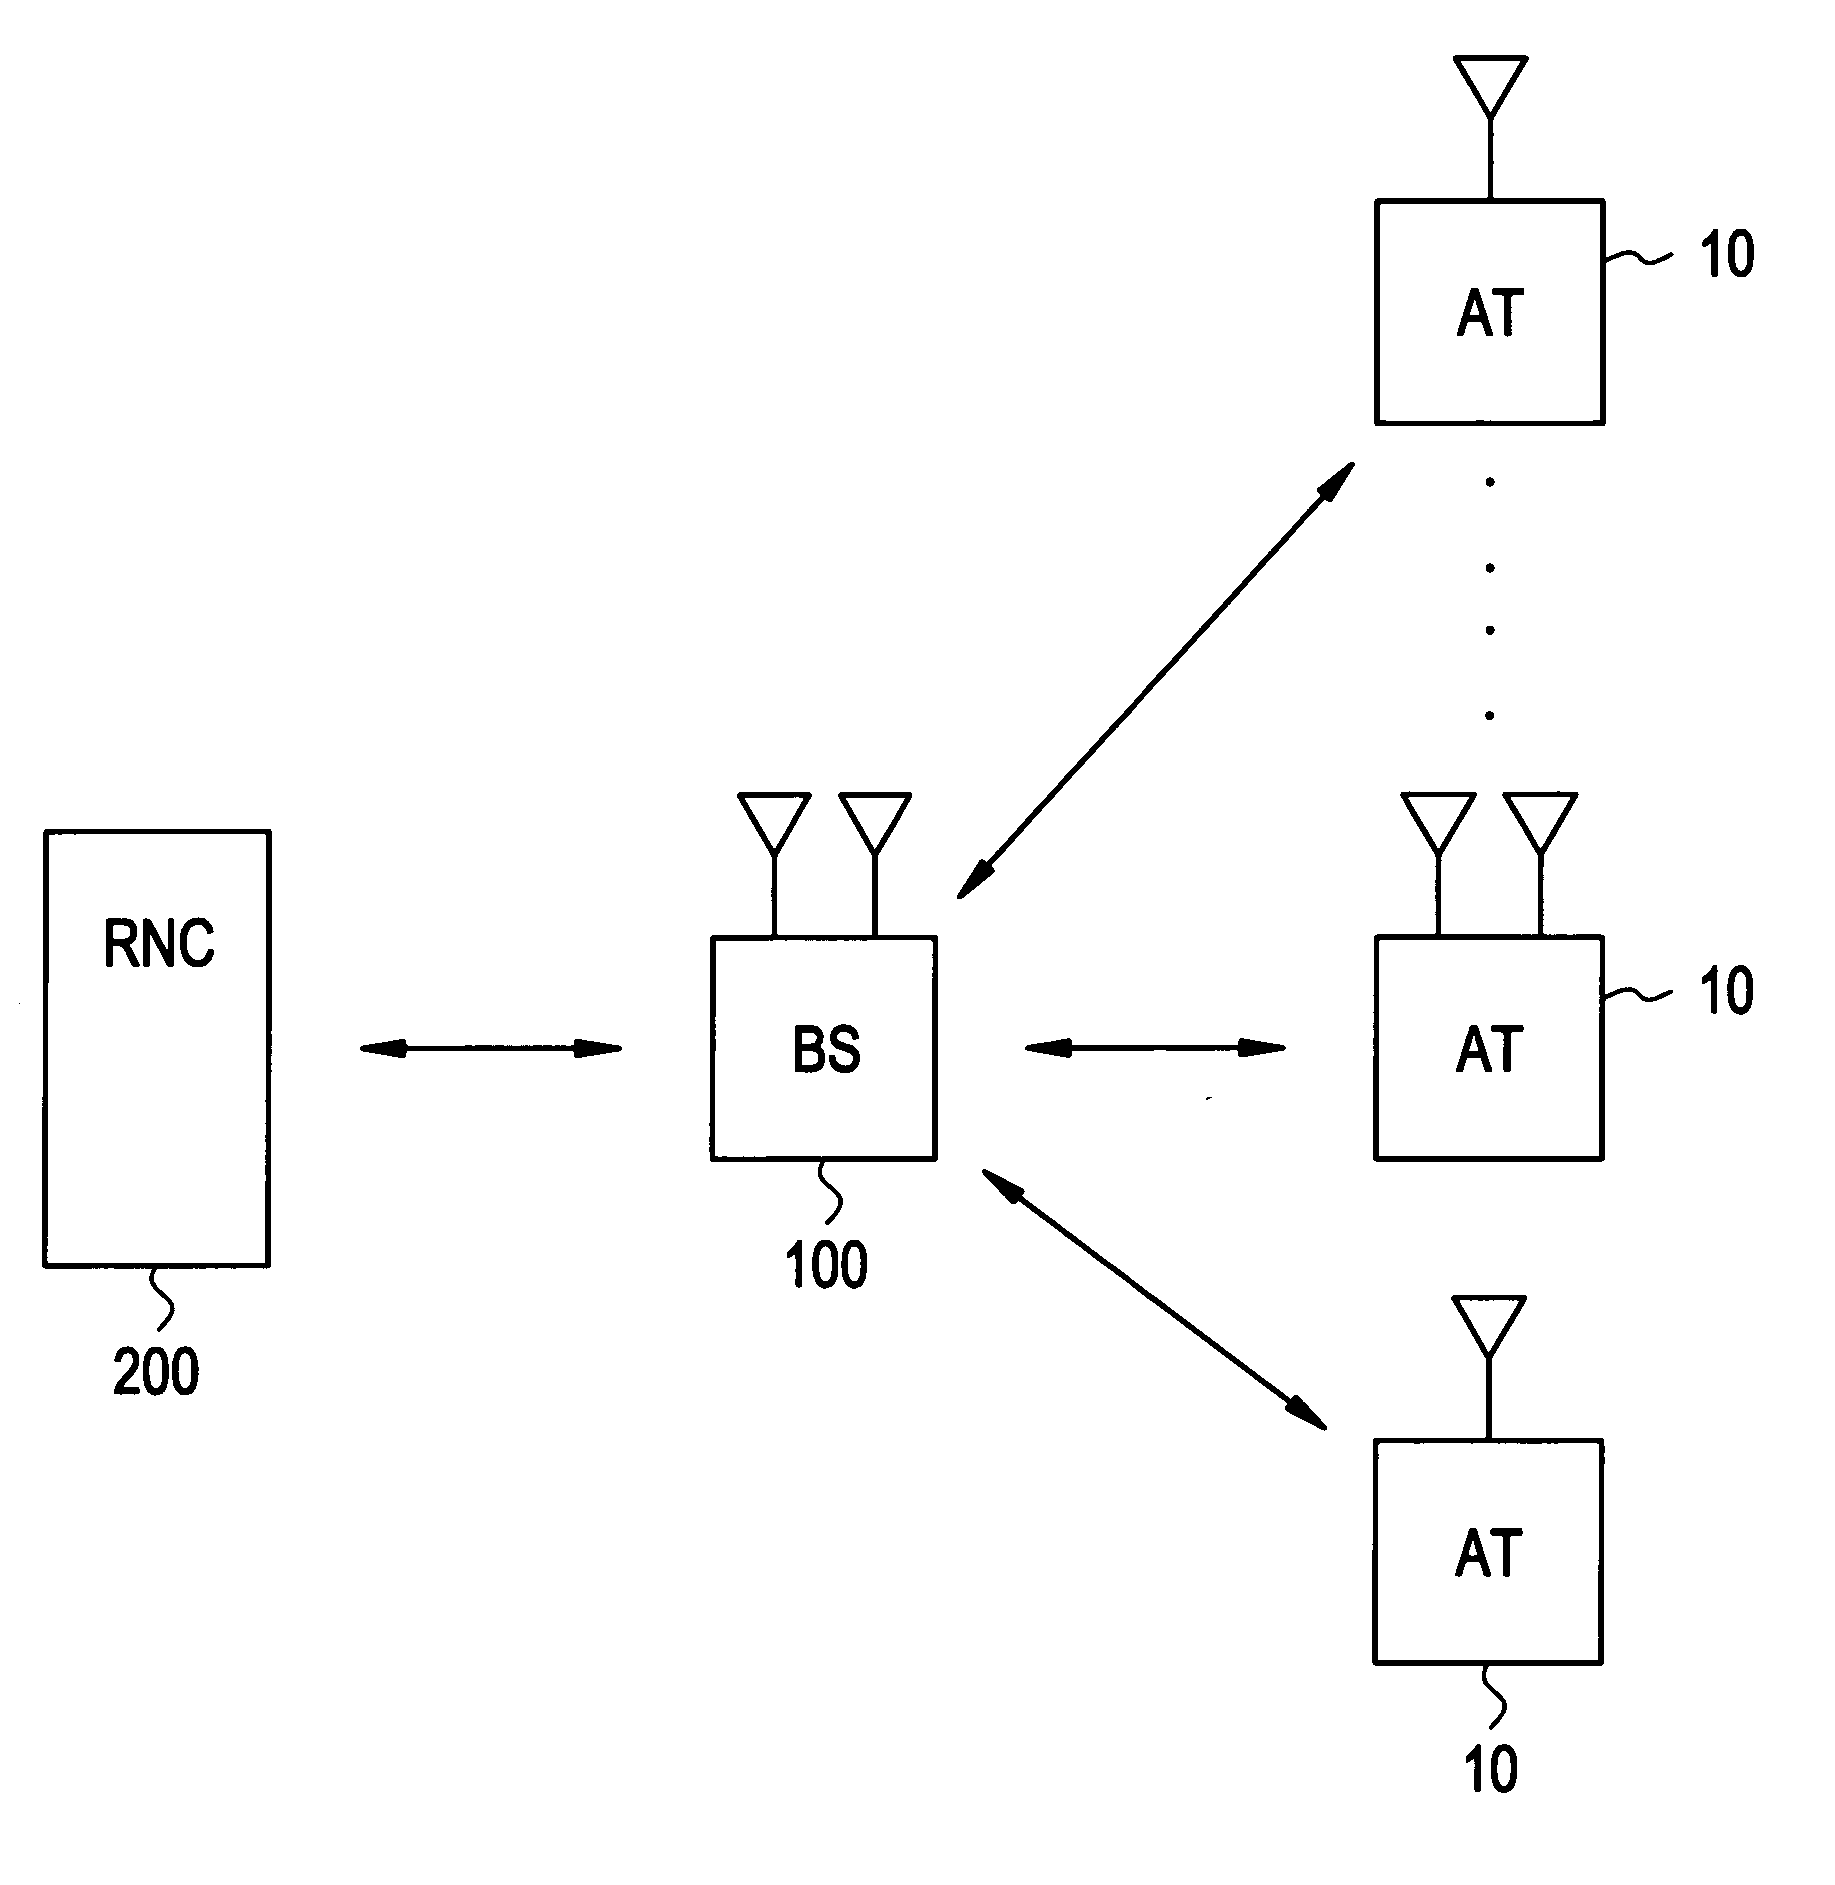 Methods for quality of service reverse link admission and overload control in a wireless system